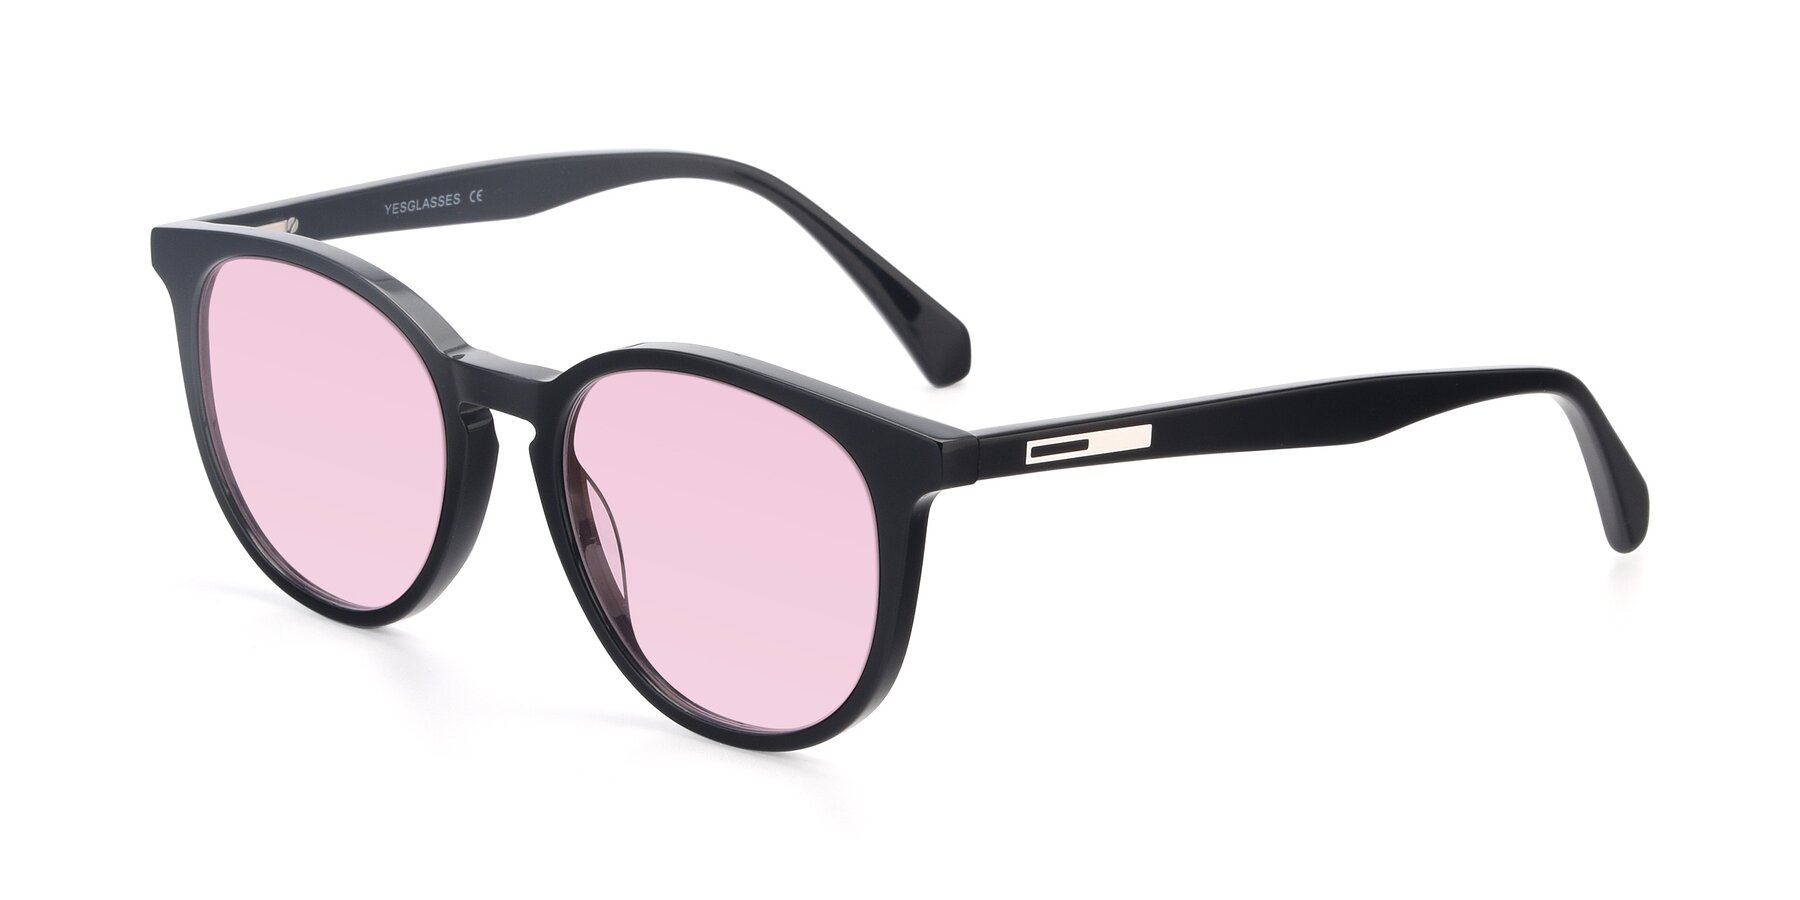 Angle of 17721 in Black with Light Pink Tinted Lenses